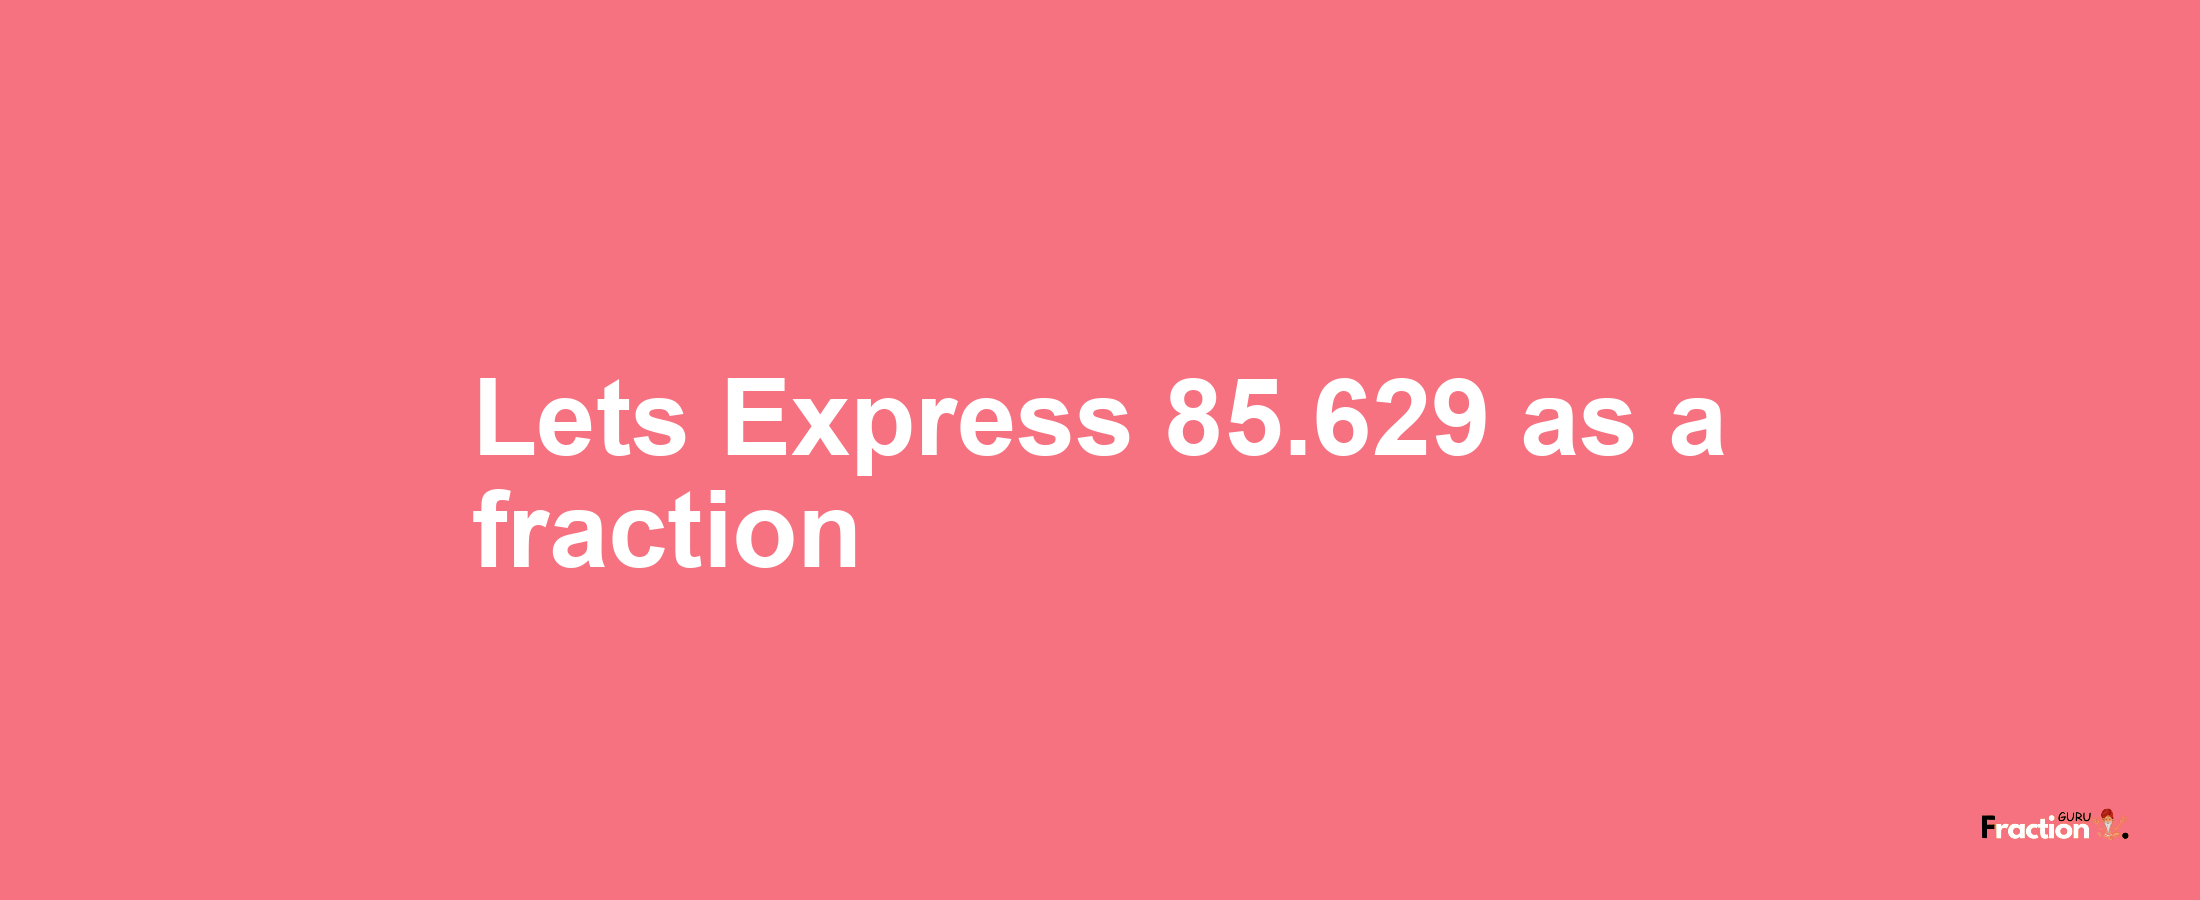 Lets Express 85.629 as afraction